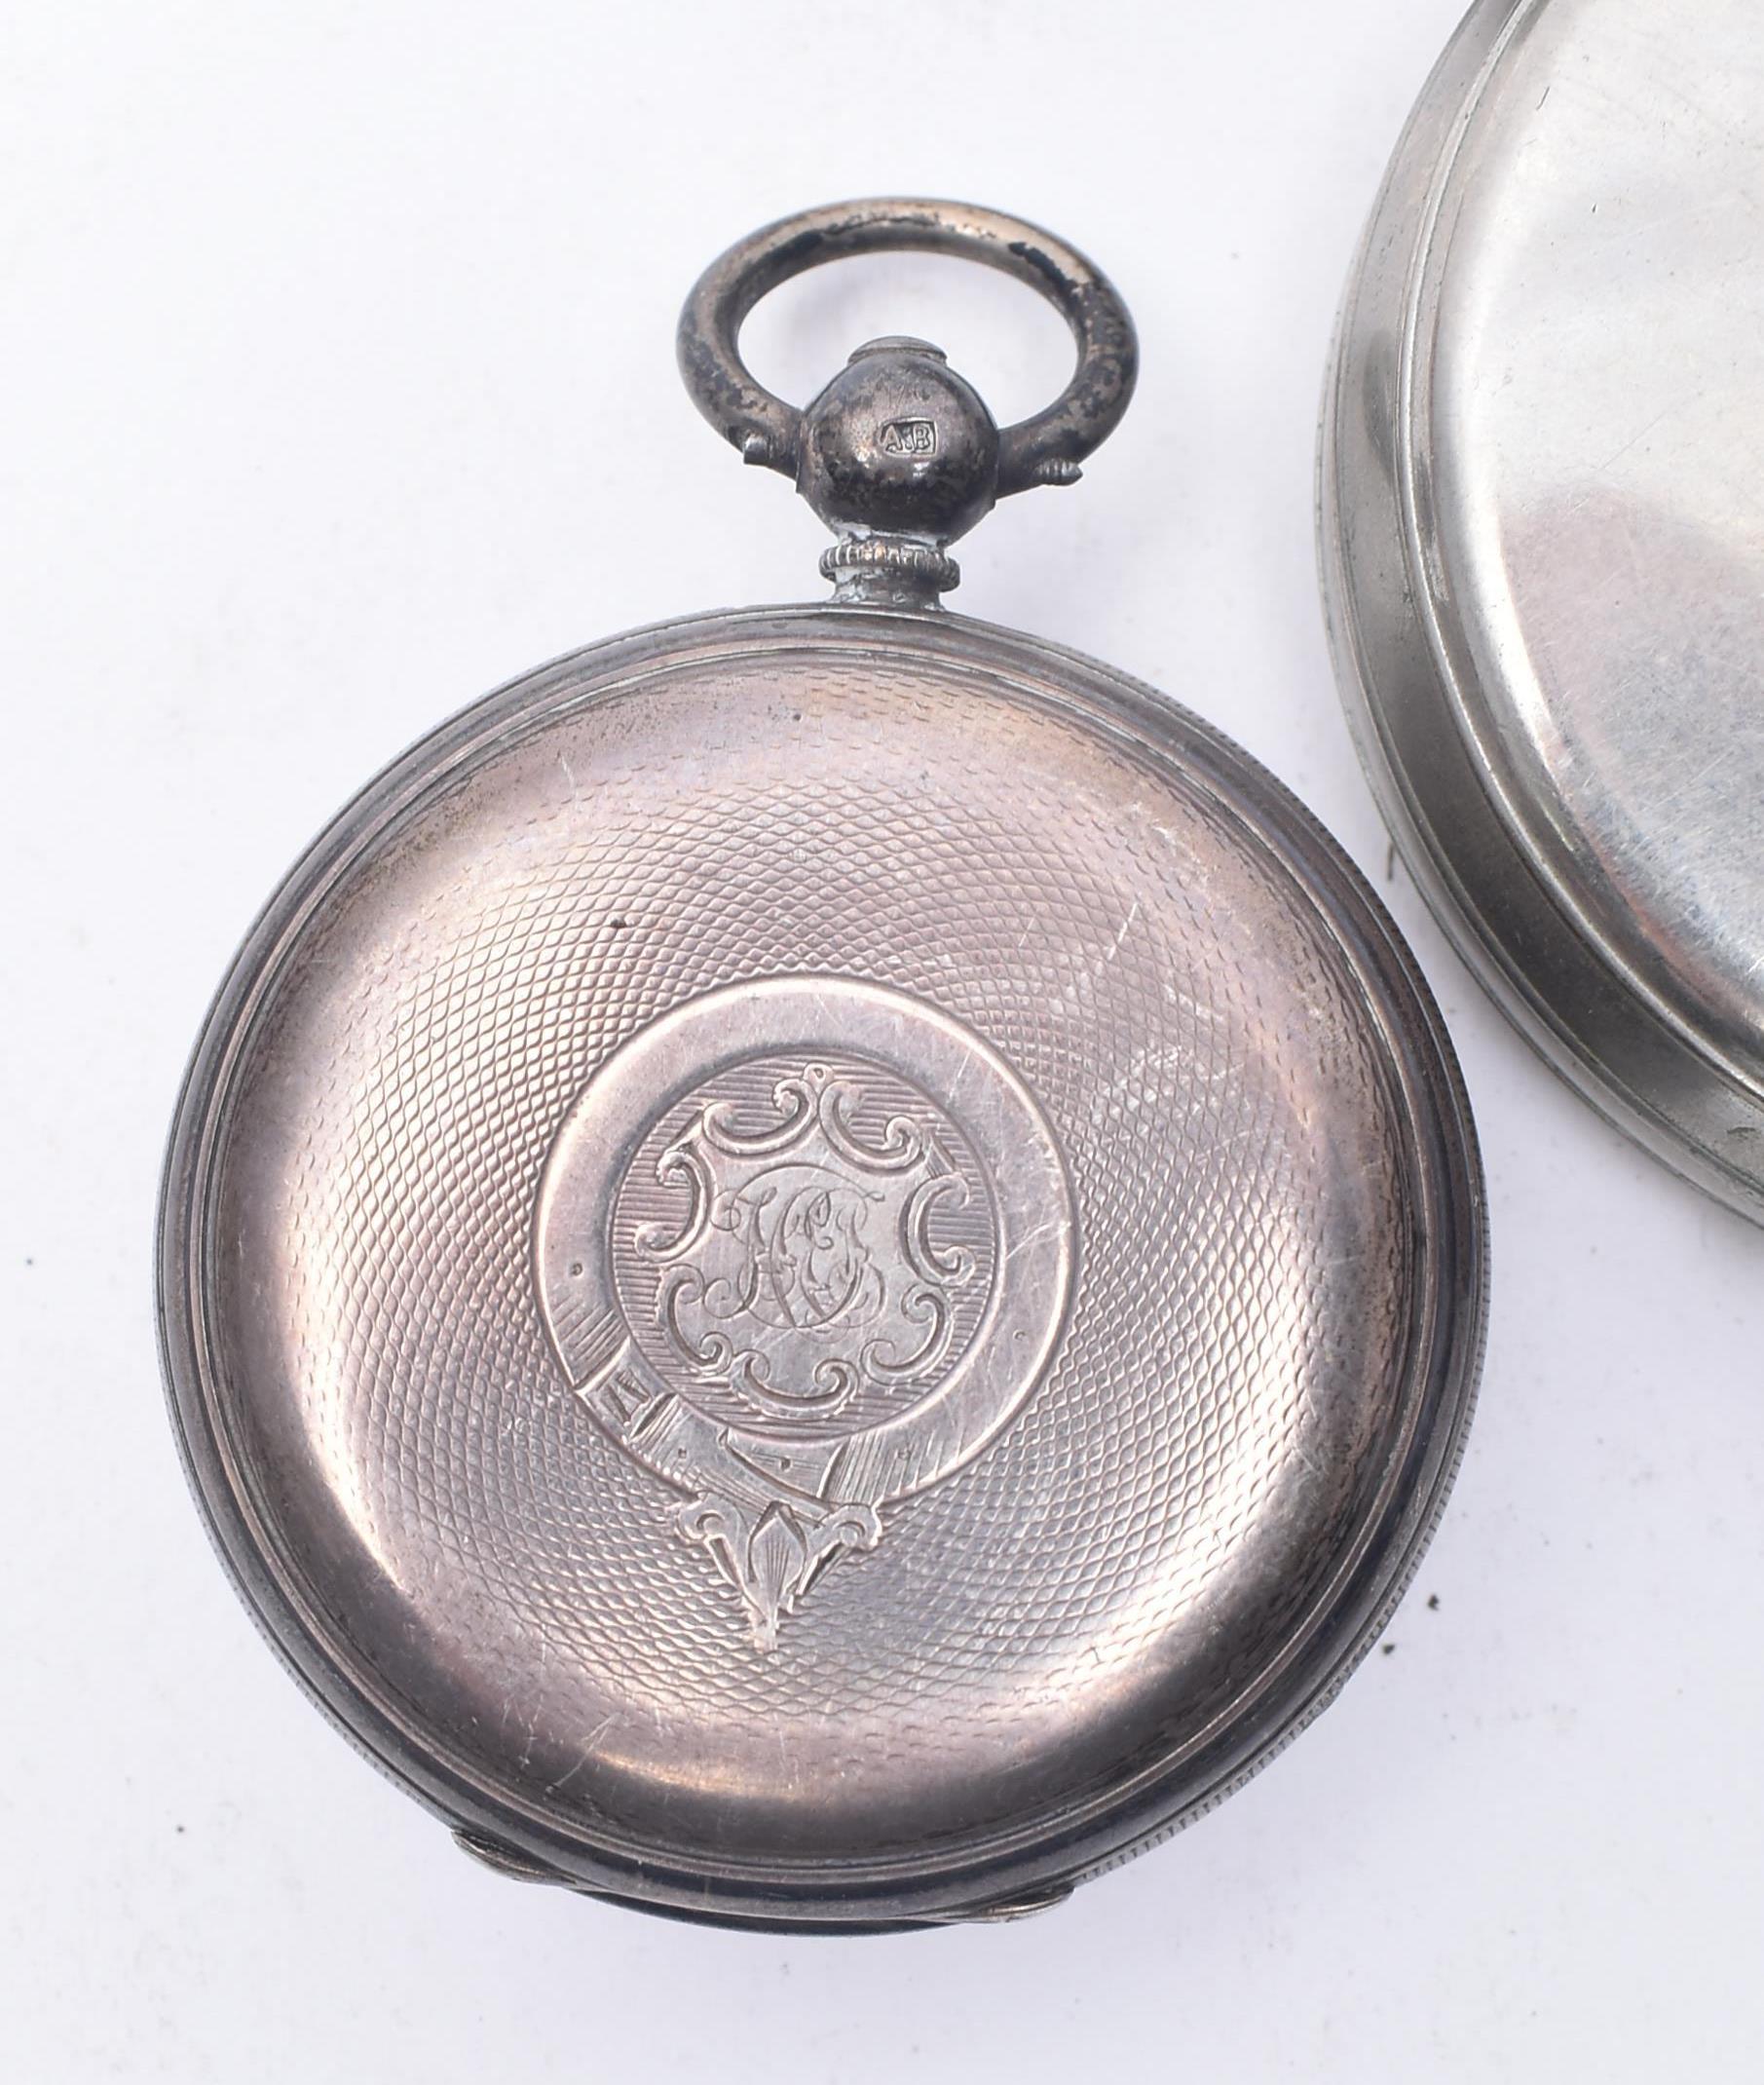 COLLECTION OF EARLY-MID 20TH CENTURY GENTS' POCKET WATCHES - Image 6 of 10